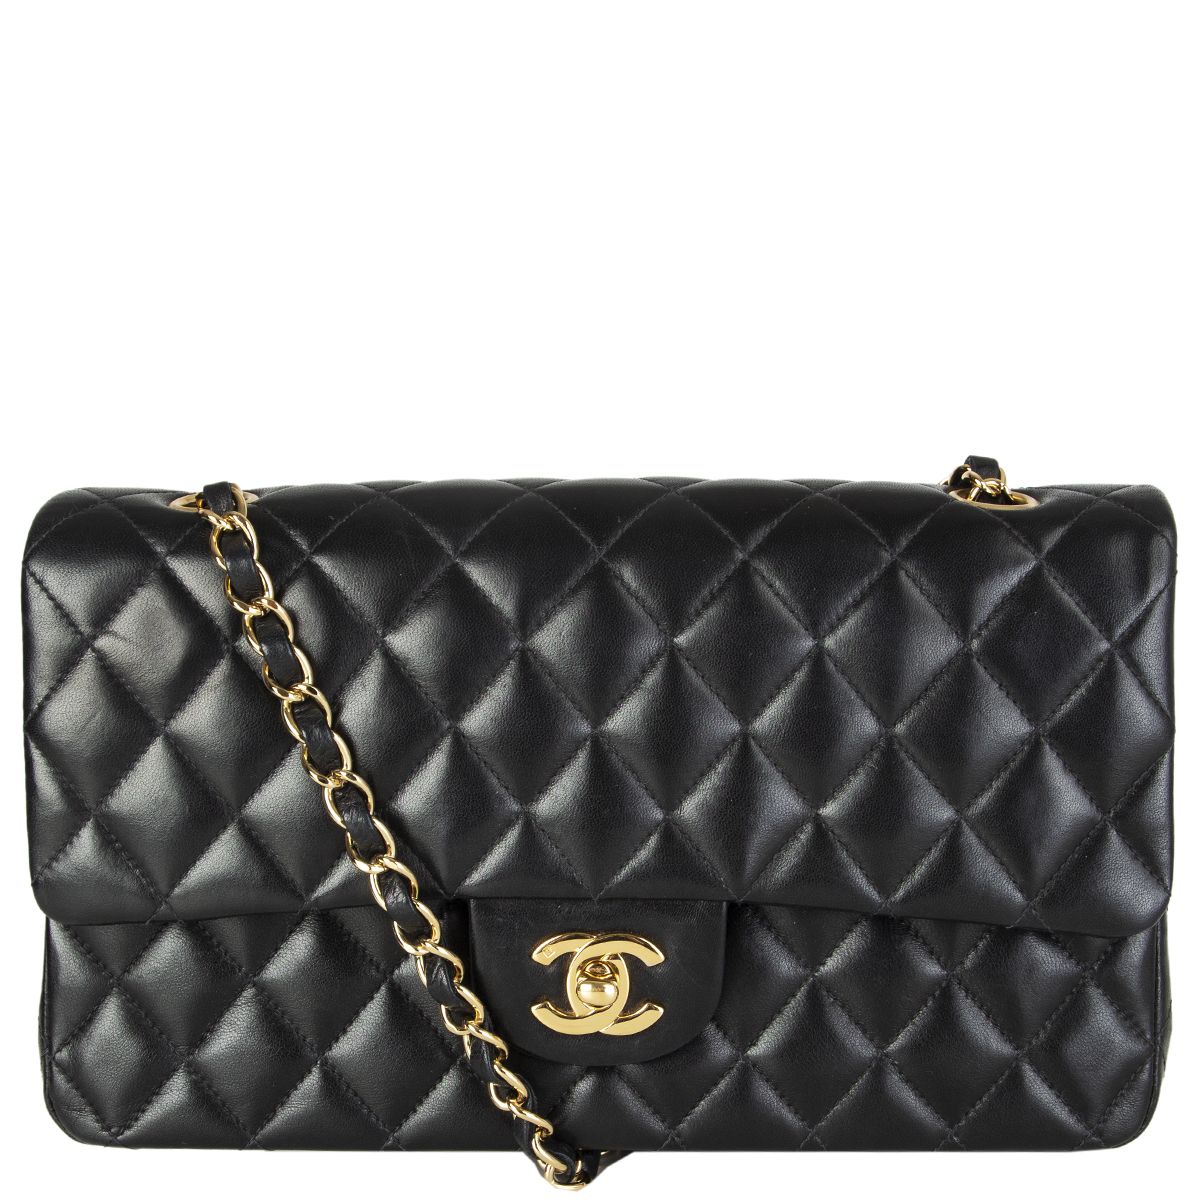 Chanel Vintage Small Quilted Flap Bag Midnight Blue/Gold